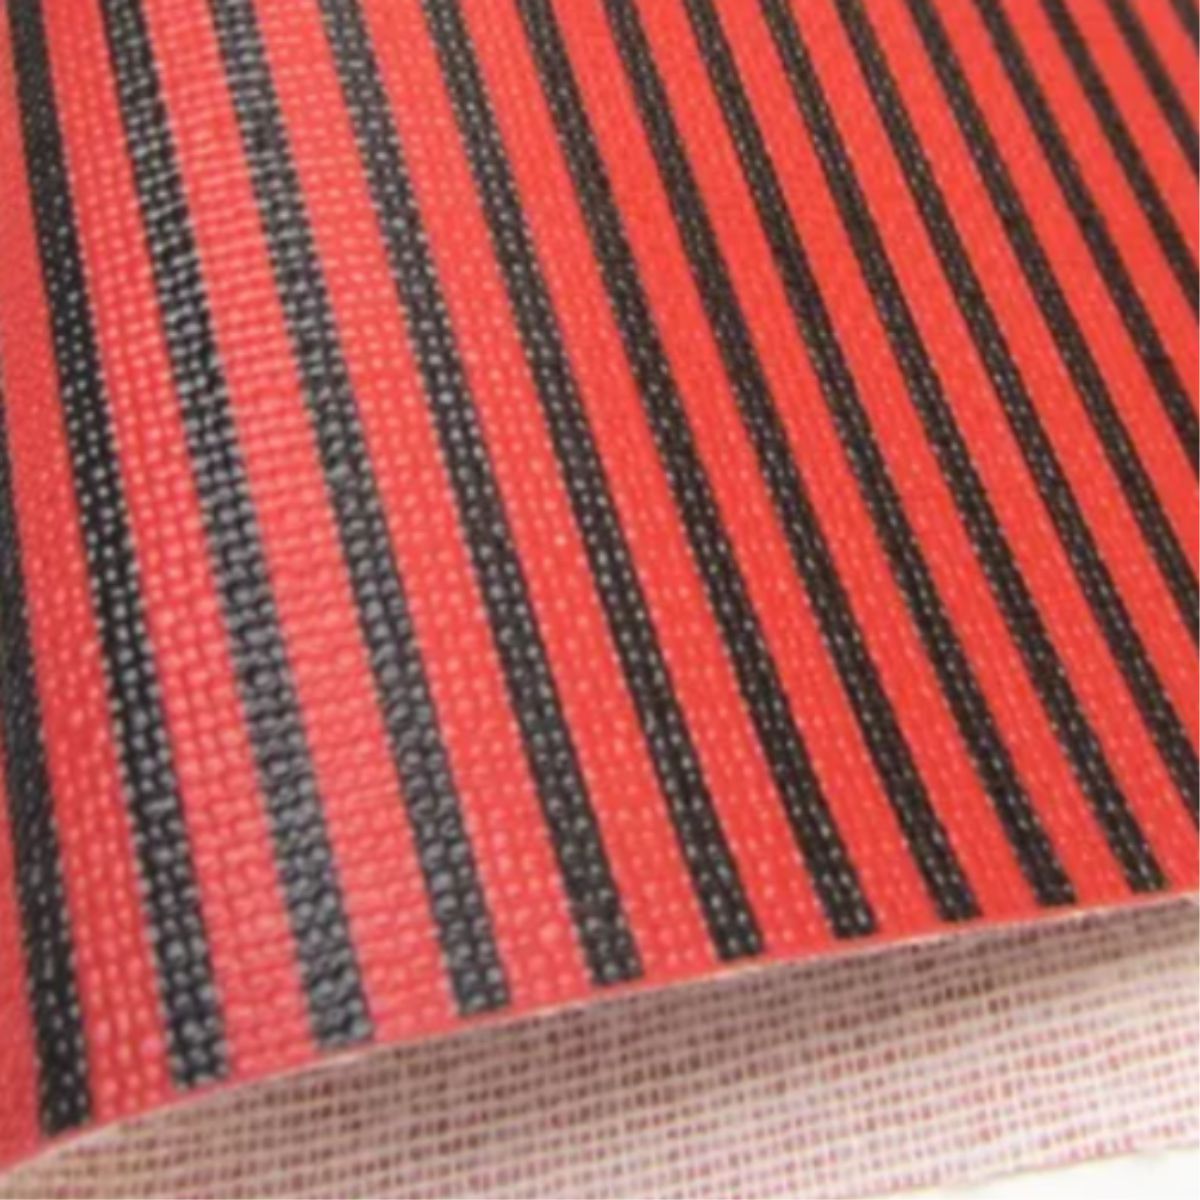 Faux Leather Black And Red Striped Small Fabric Synthetic 11.75in x 12in  Sheets